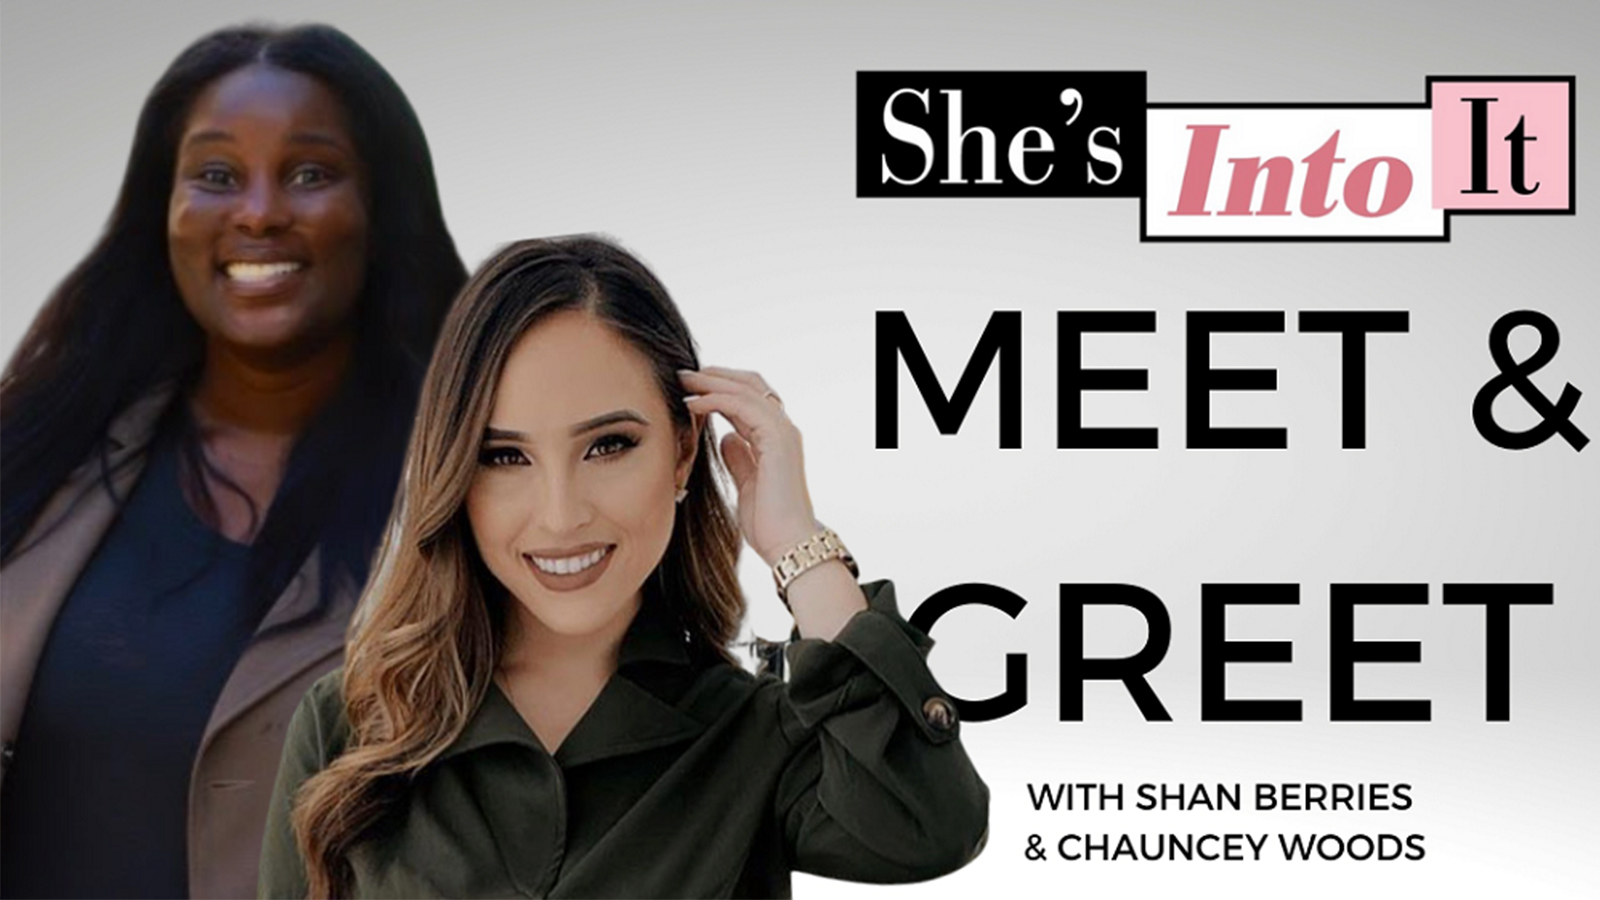 Meet and Greet invitation including digital influencers, Chauncey Woods and Shan Berries.